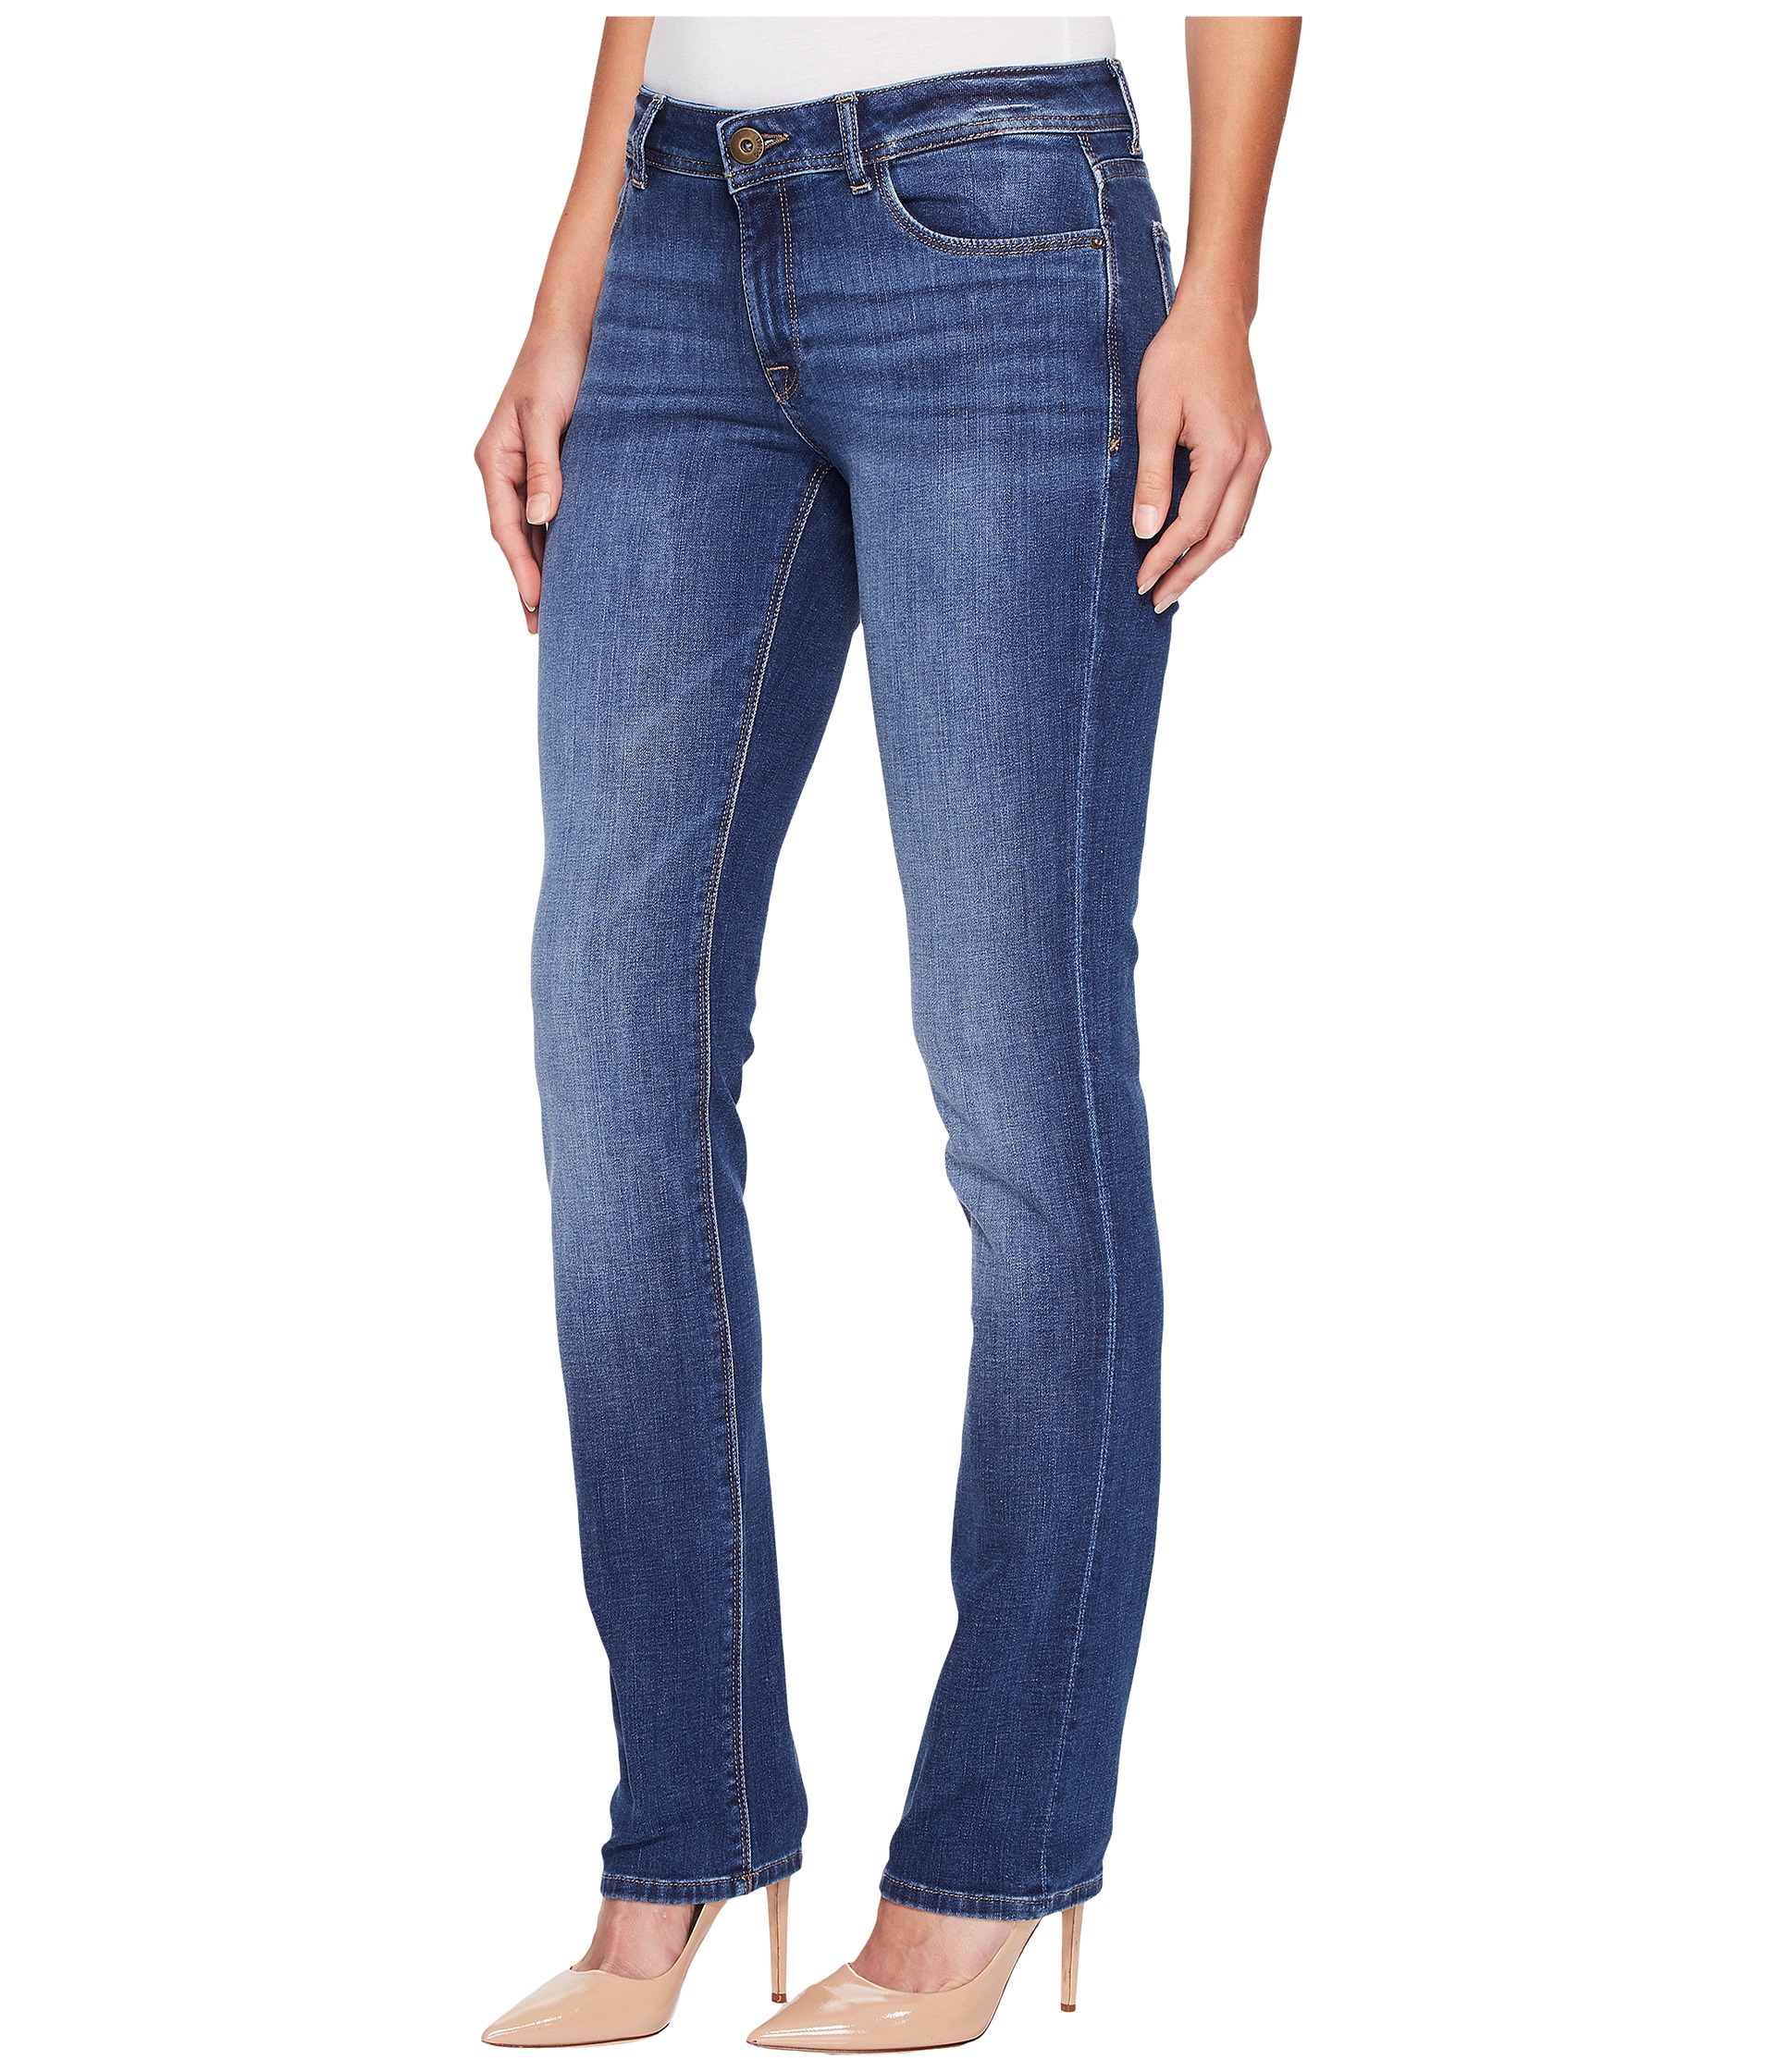 DL1961 Coco Curvy Straight Jeans in Pacific - Zappos.com Free Shipping ...